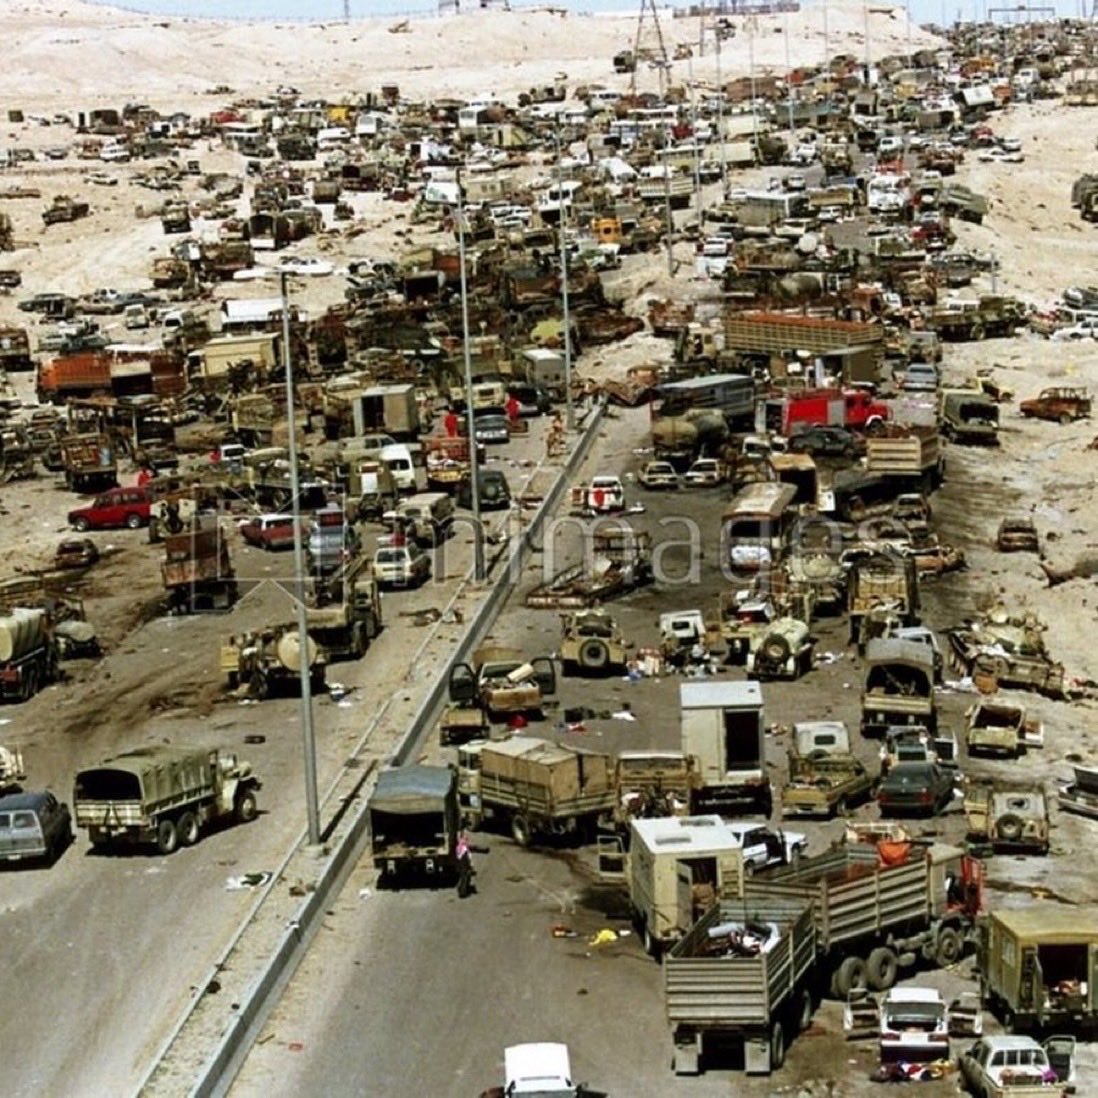 #horrors.George #Bush an #American #hero?On this day in 1991 #Iraqi troops were withdrawing from #Kuwait under #UNResolution 660.Bush instead ordered the bombing of the retreating column.Over 10,000 Iraqi soldiers have been killed.A war crime known as the 'highway of death'